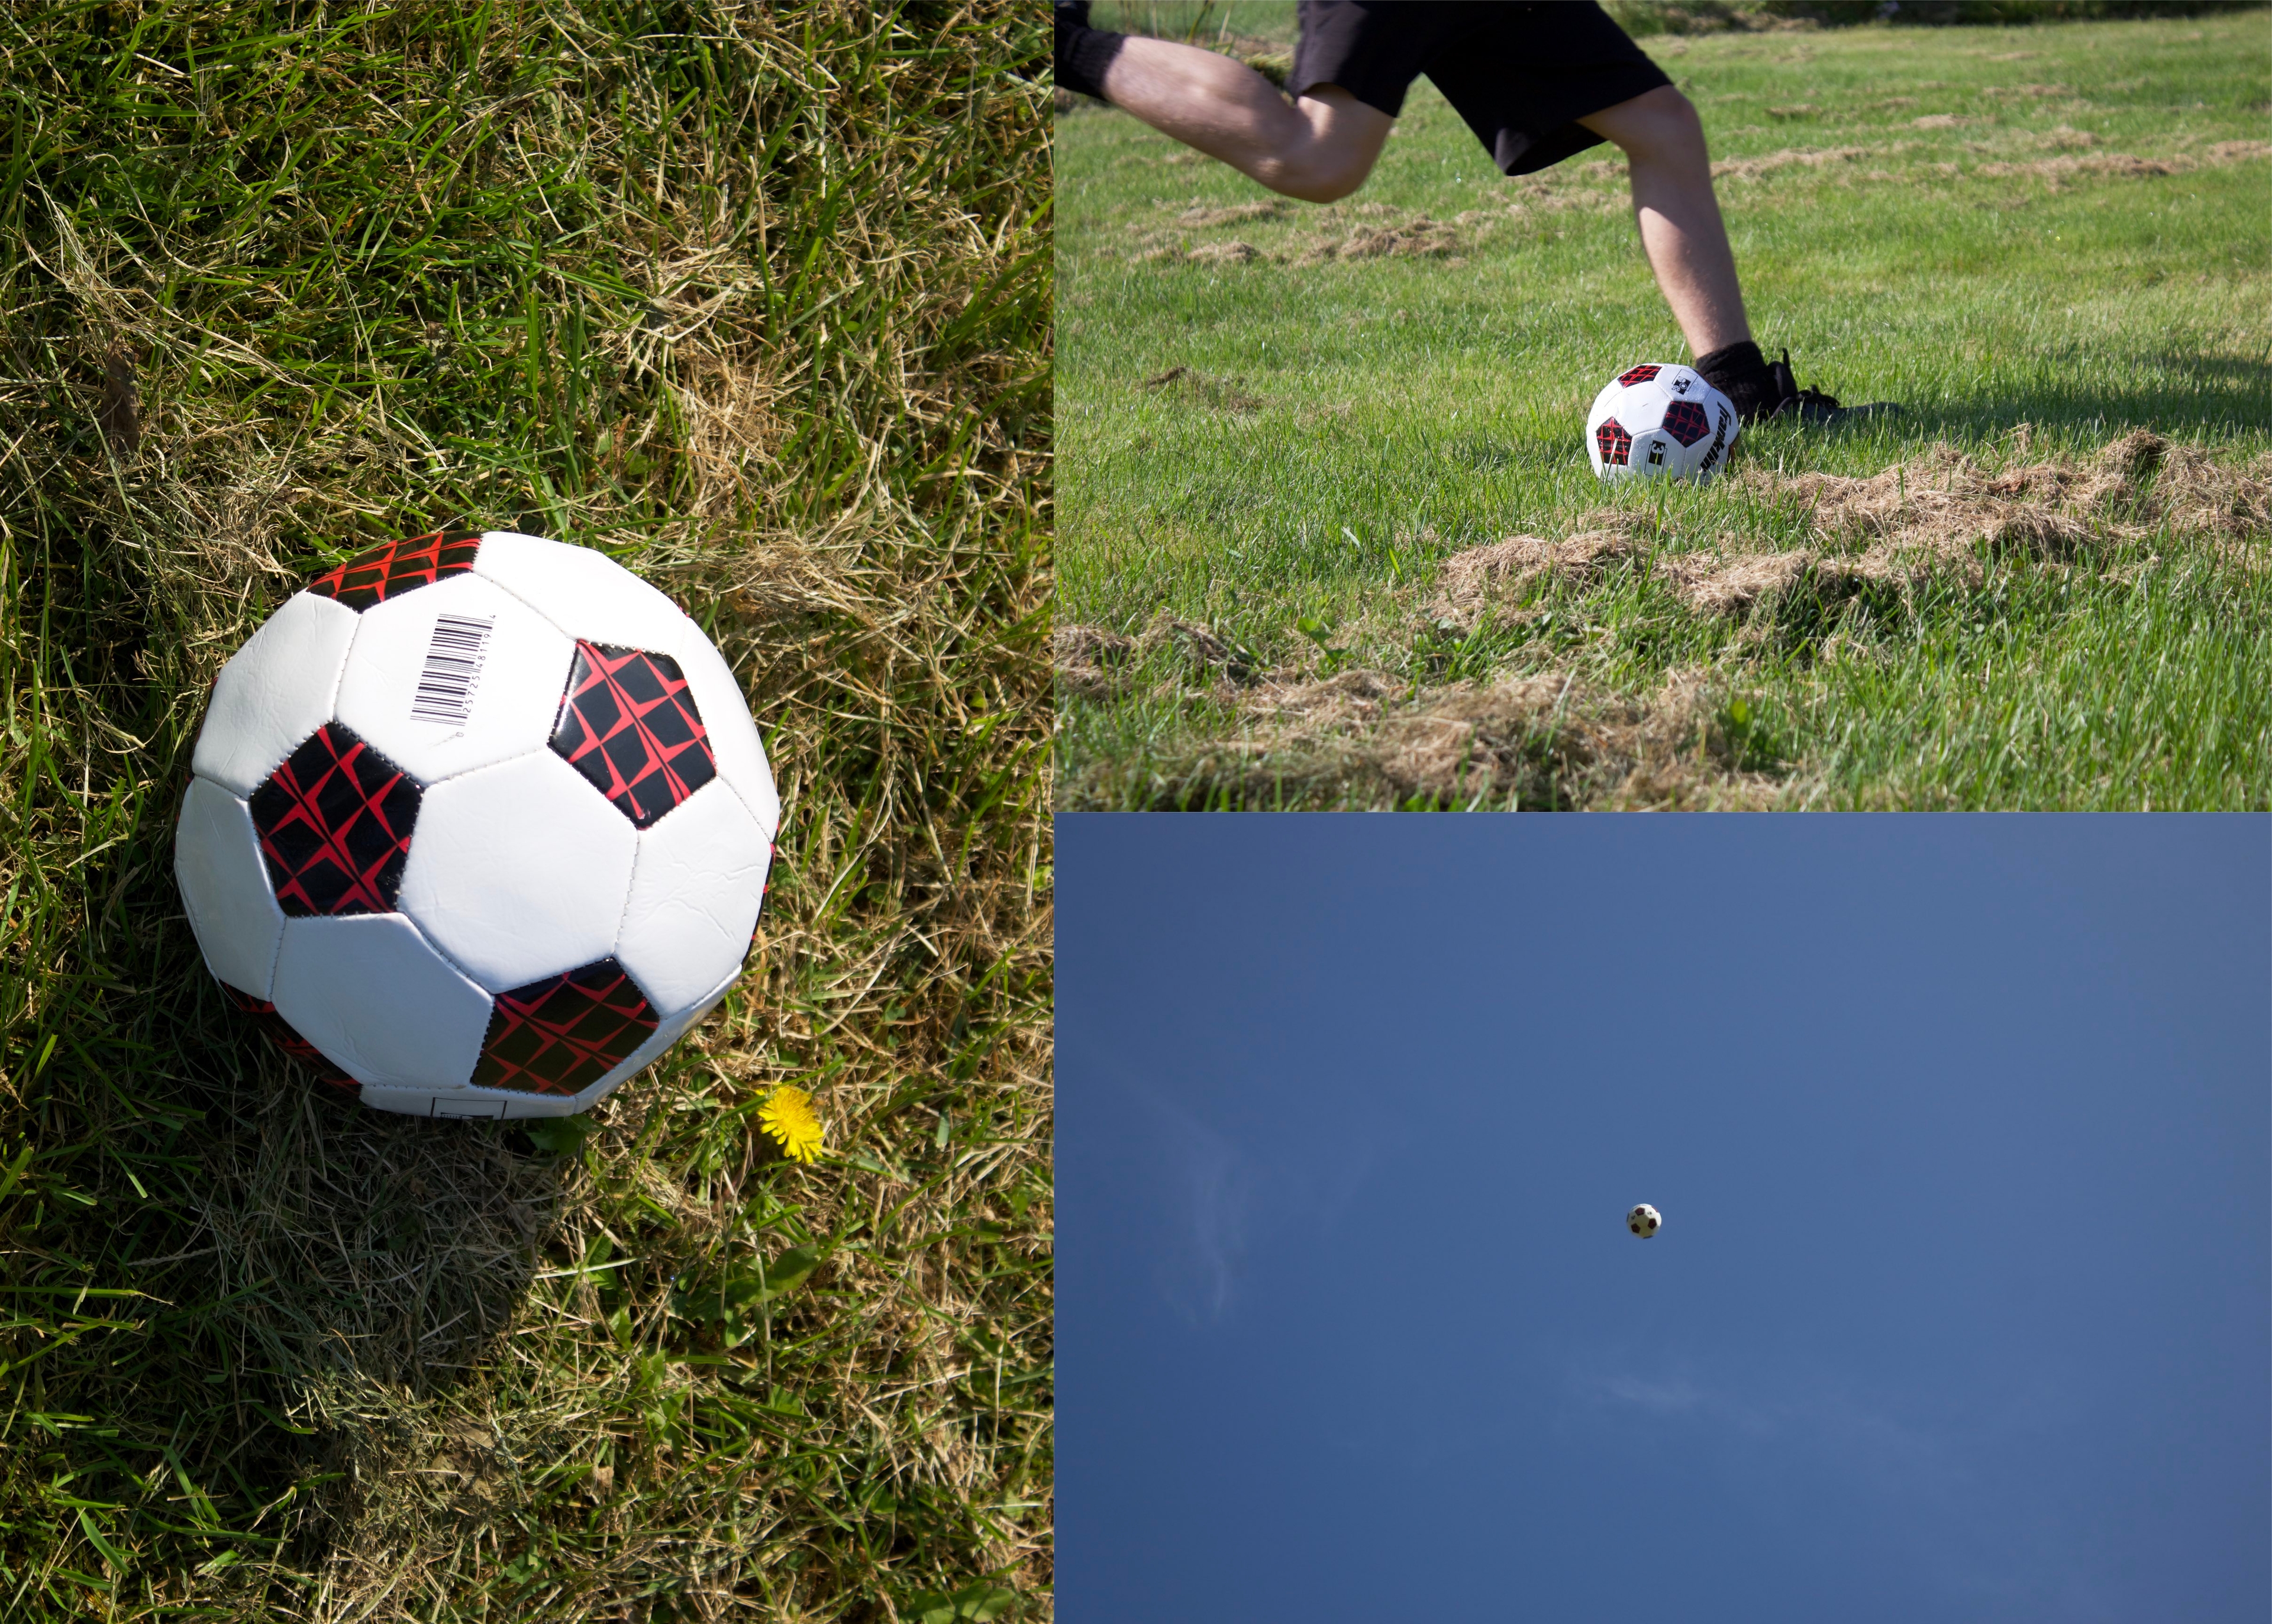 A collage of a ball, someone kicking it, and the ball high in the air.